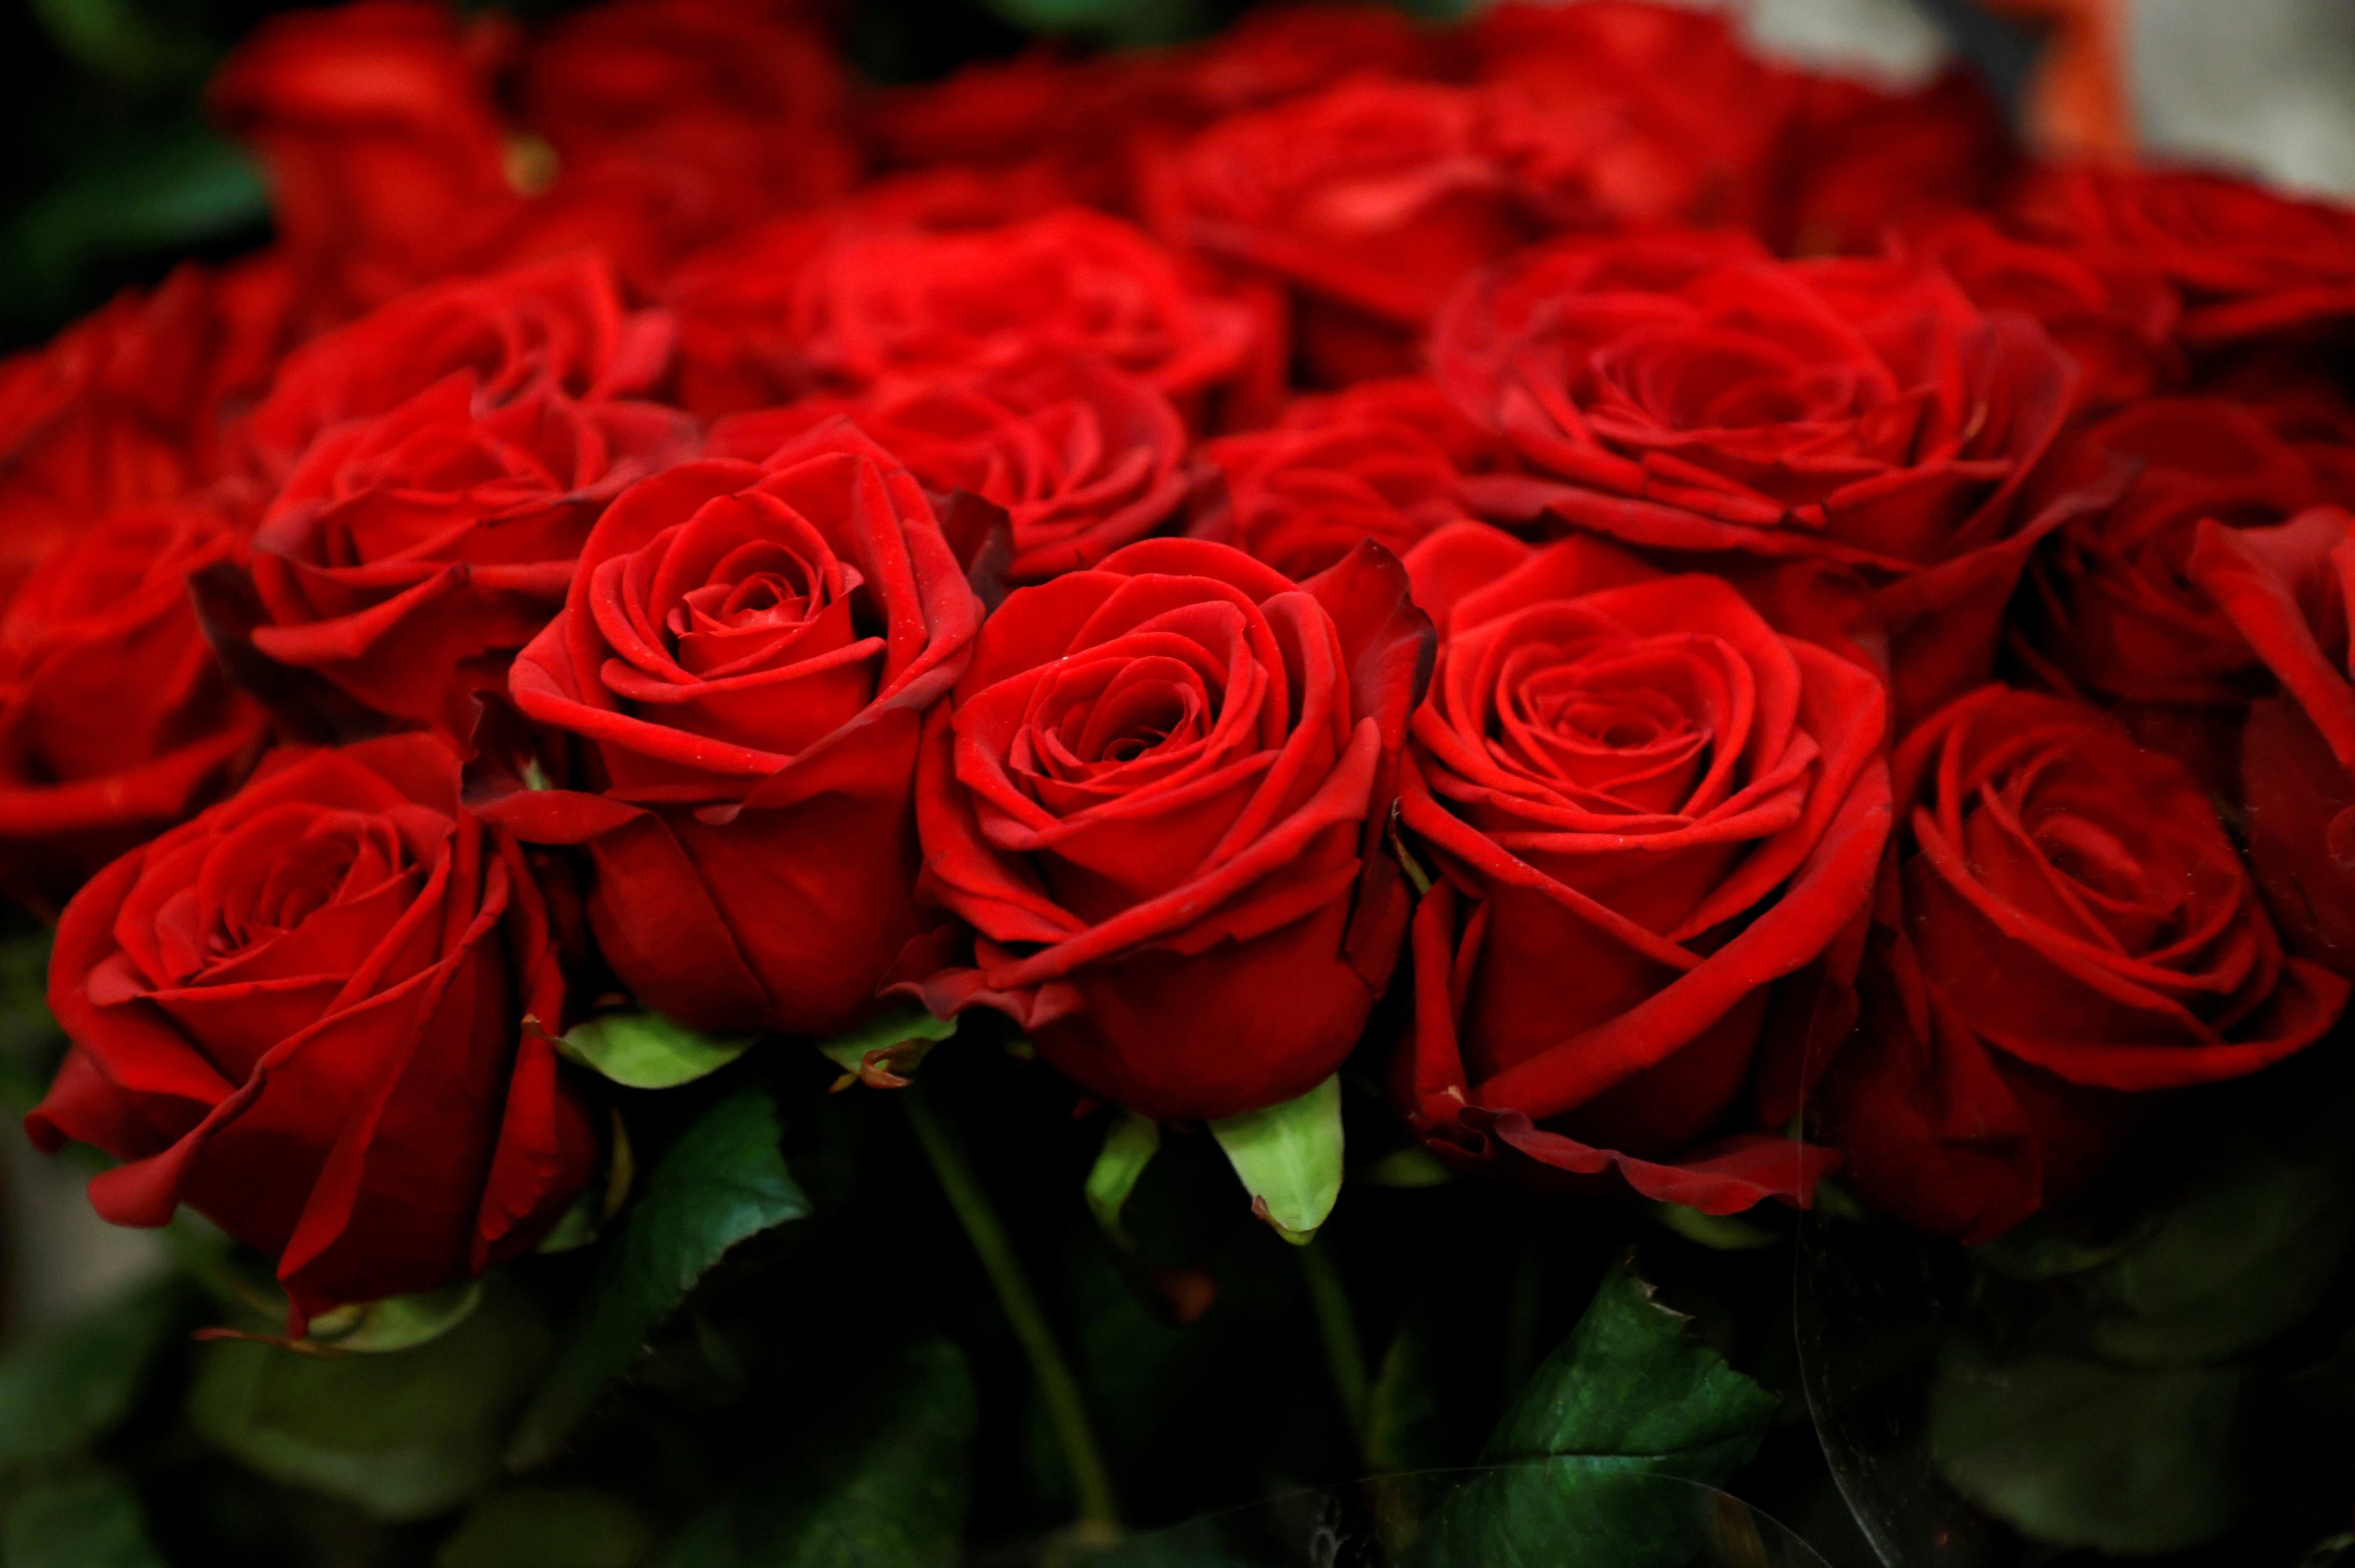 The price of love: Valentine's Day roses harm environment | Daily Sabah